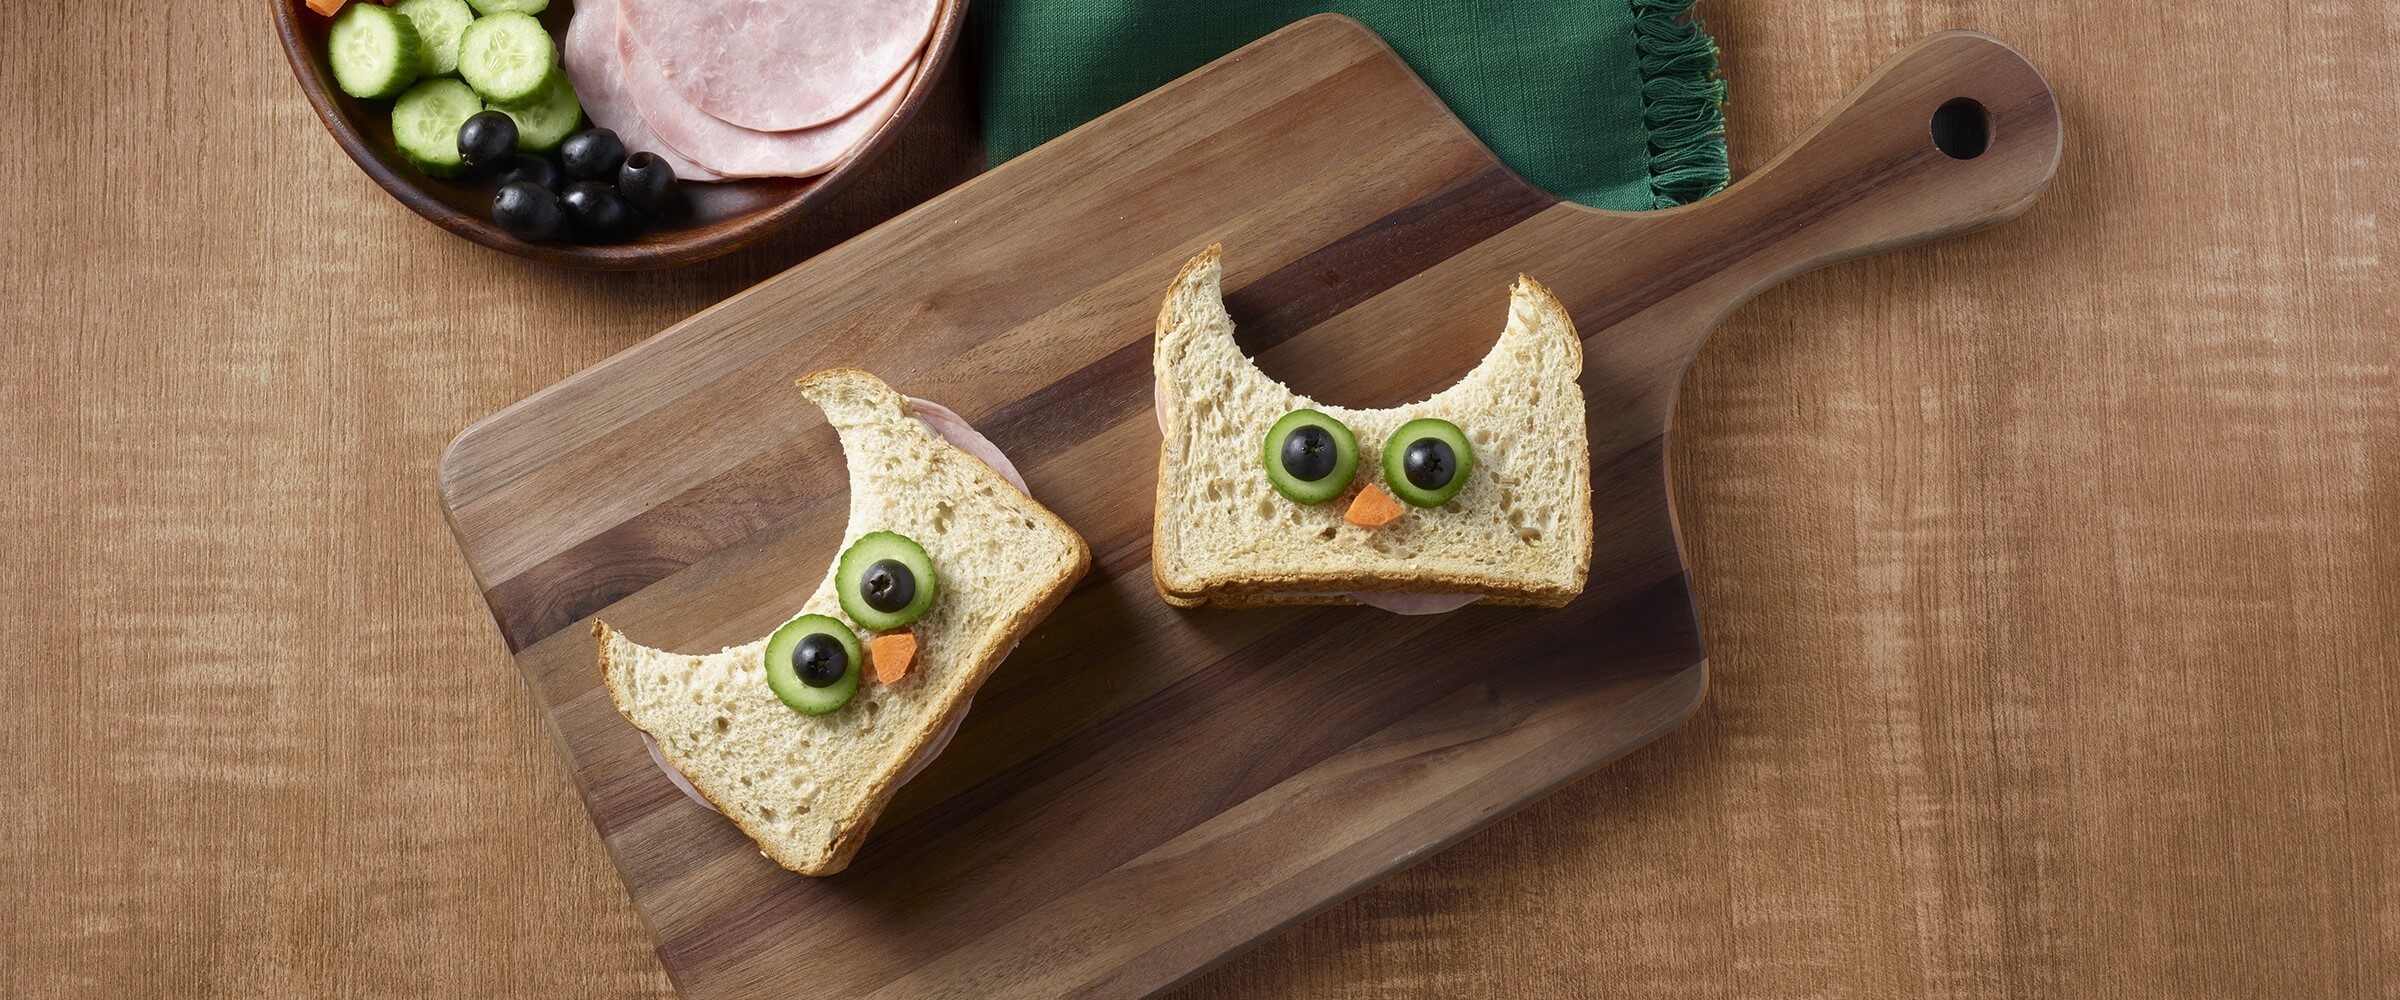 ham and cheese owls shaped sandwich cutouts on wood board